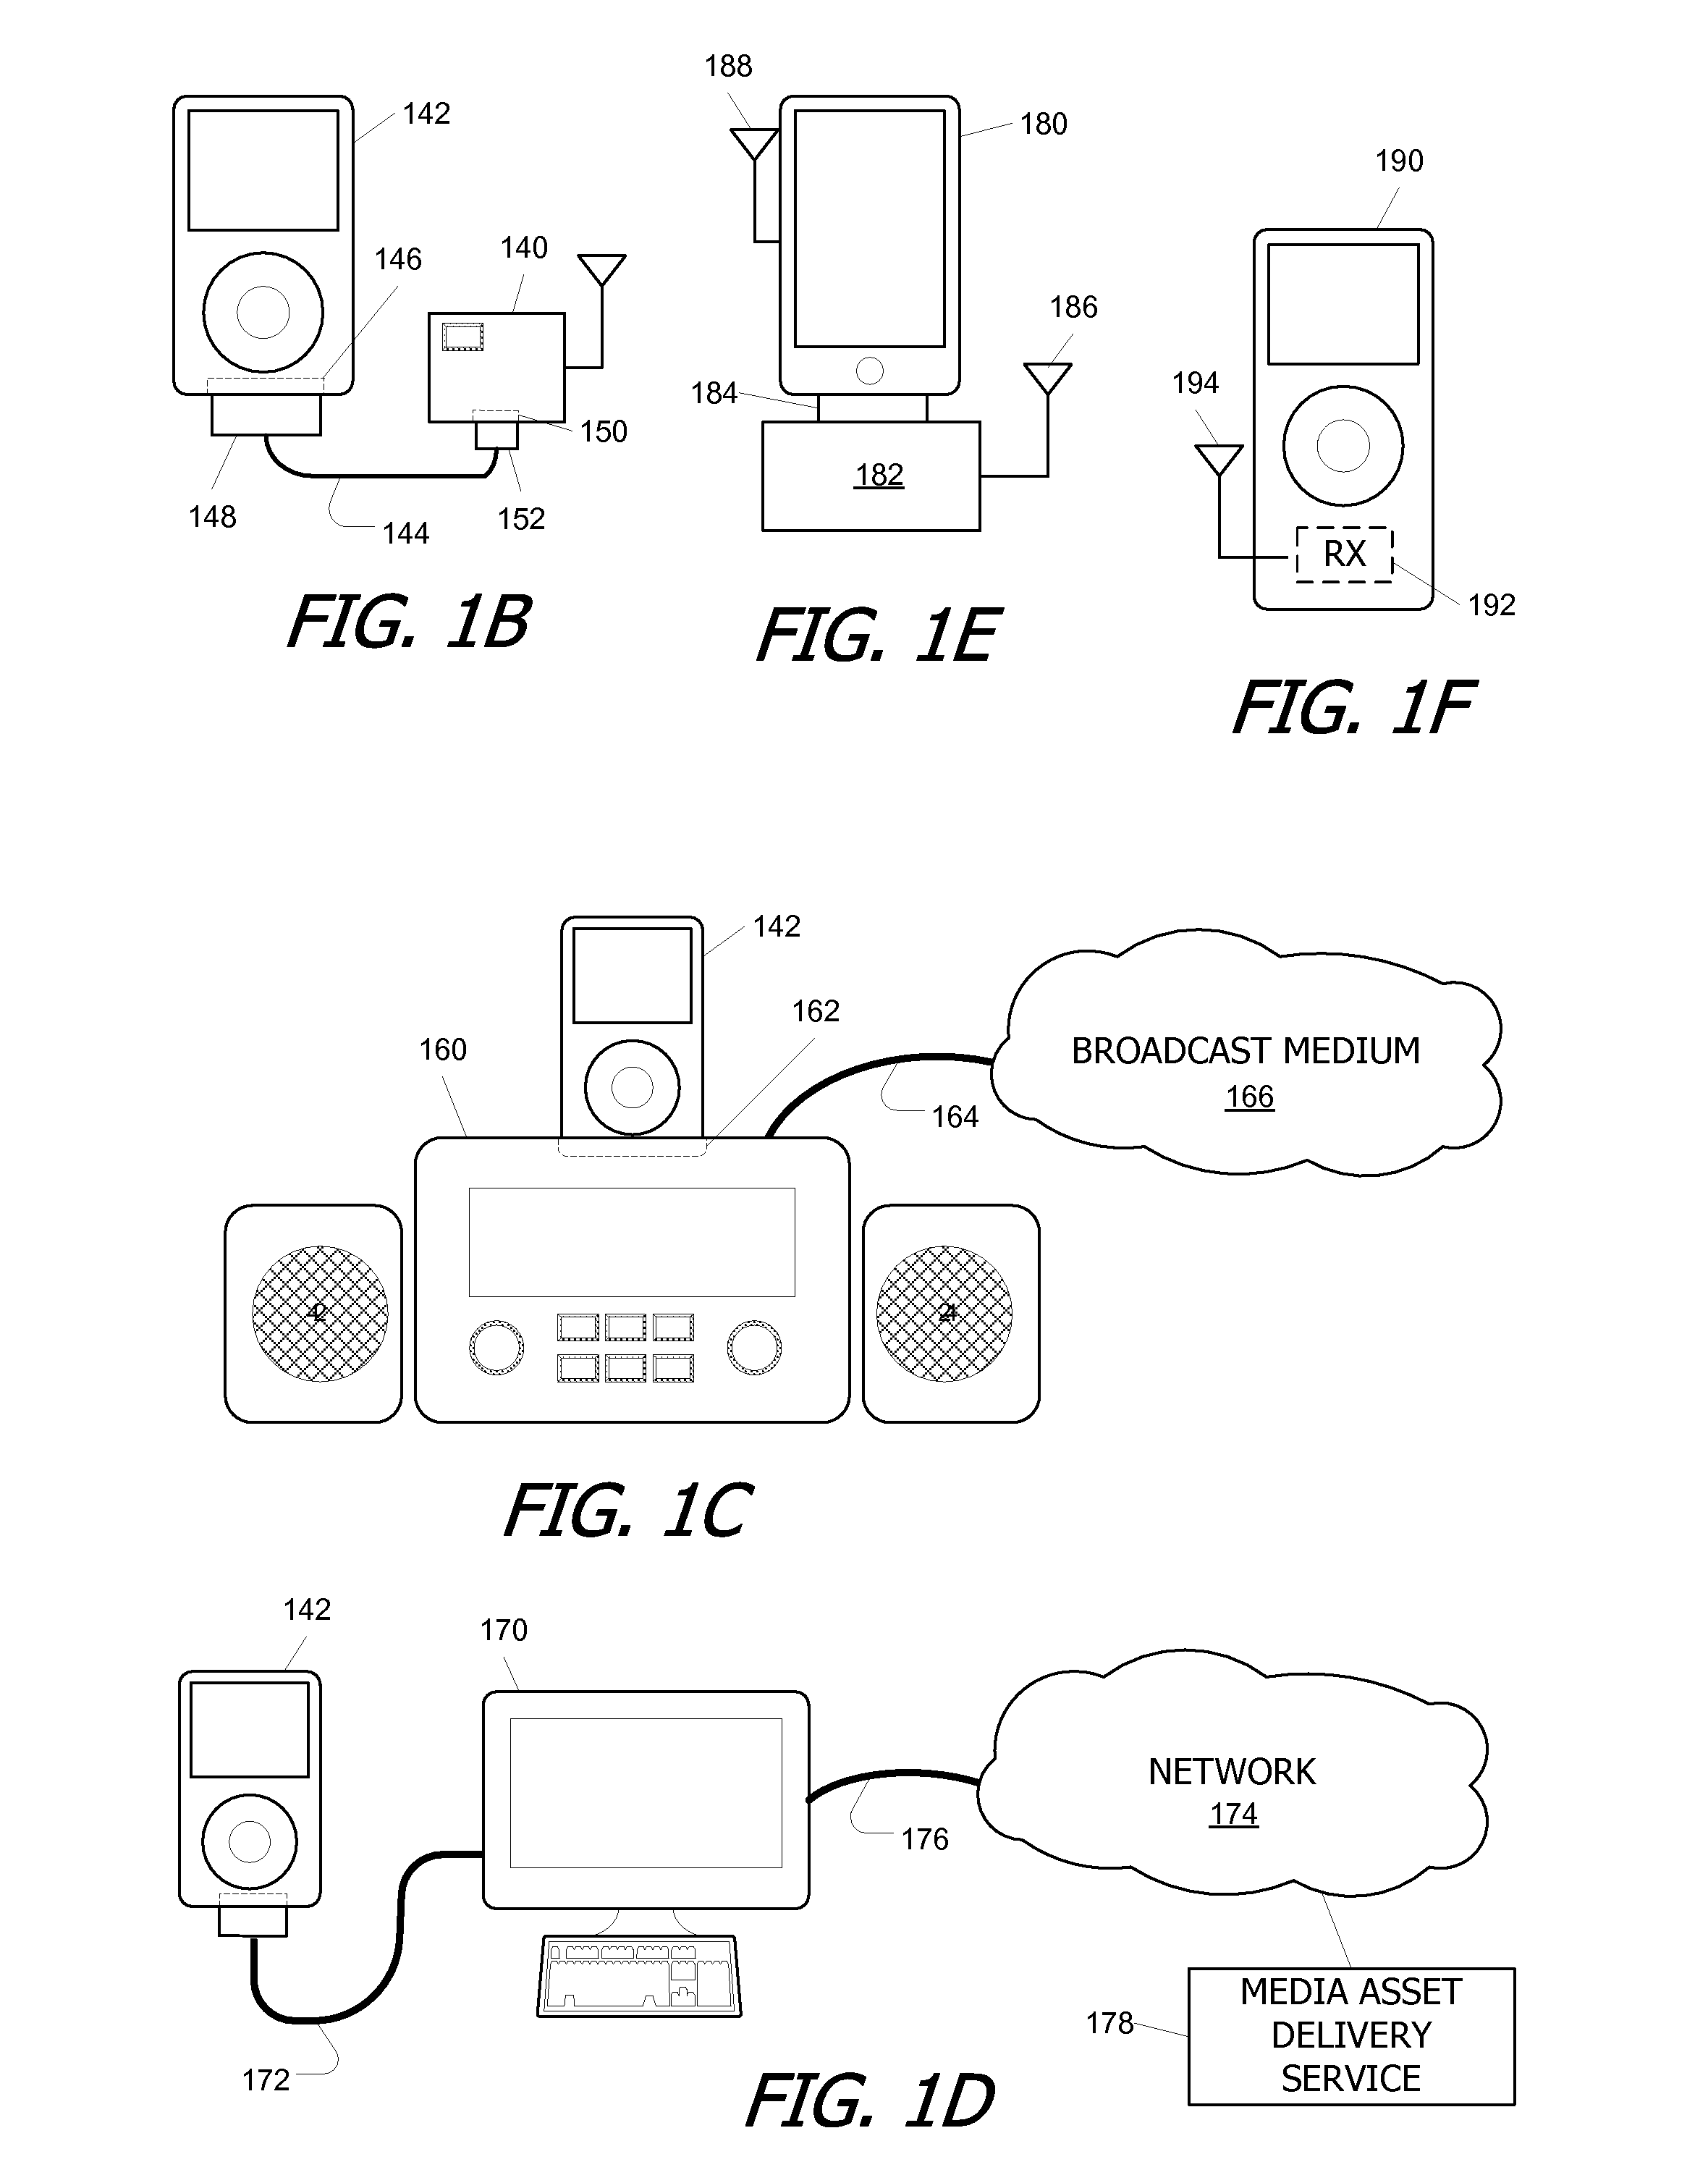 Communicating and storing information associated with media broadcasts